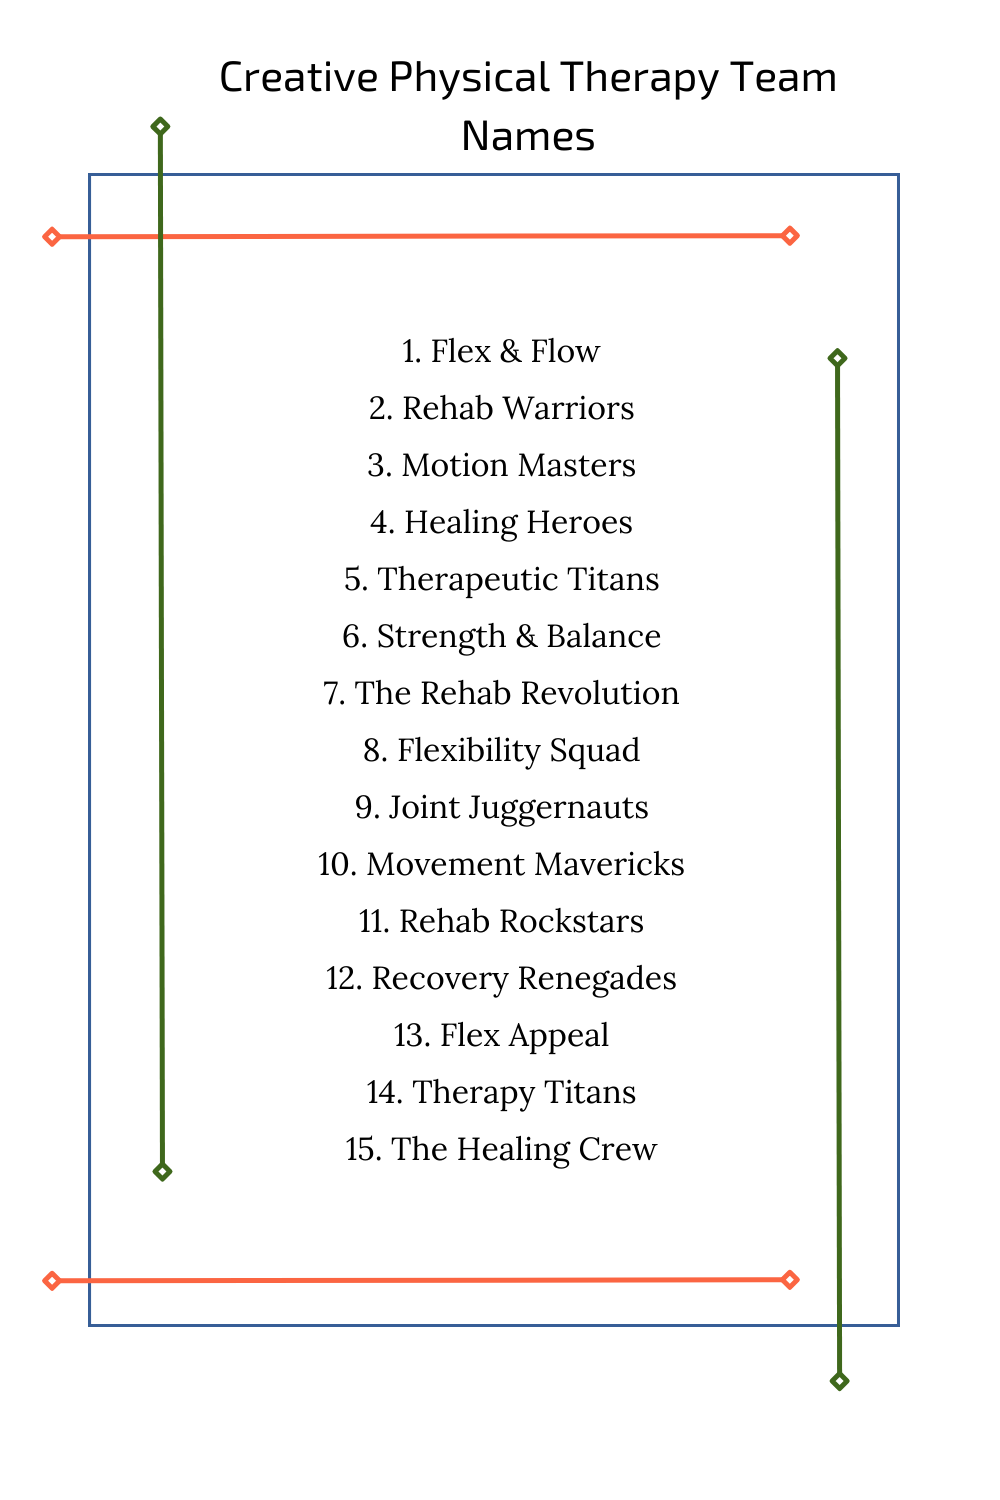 Creative Physical Therapy Team Names